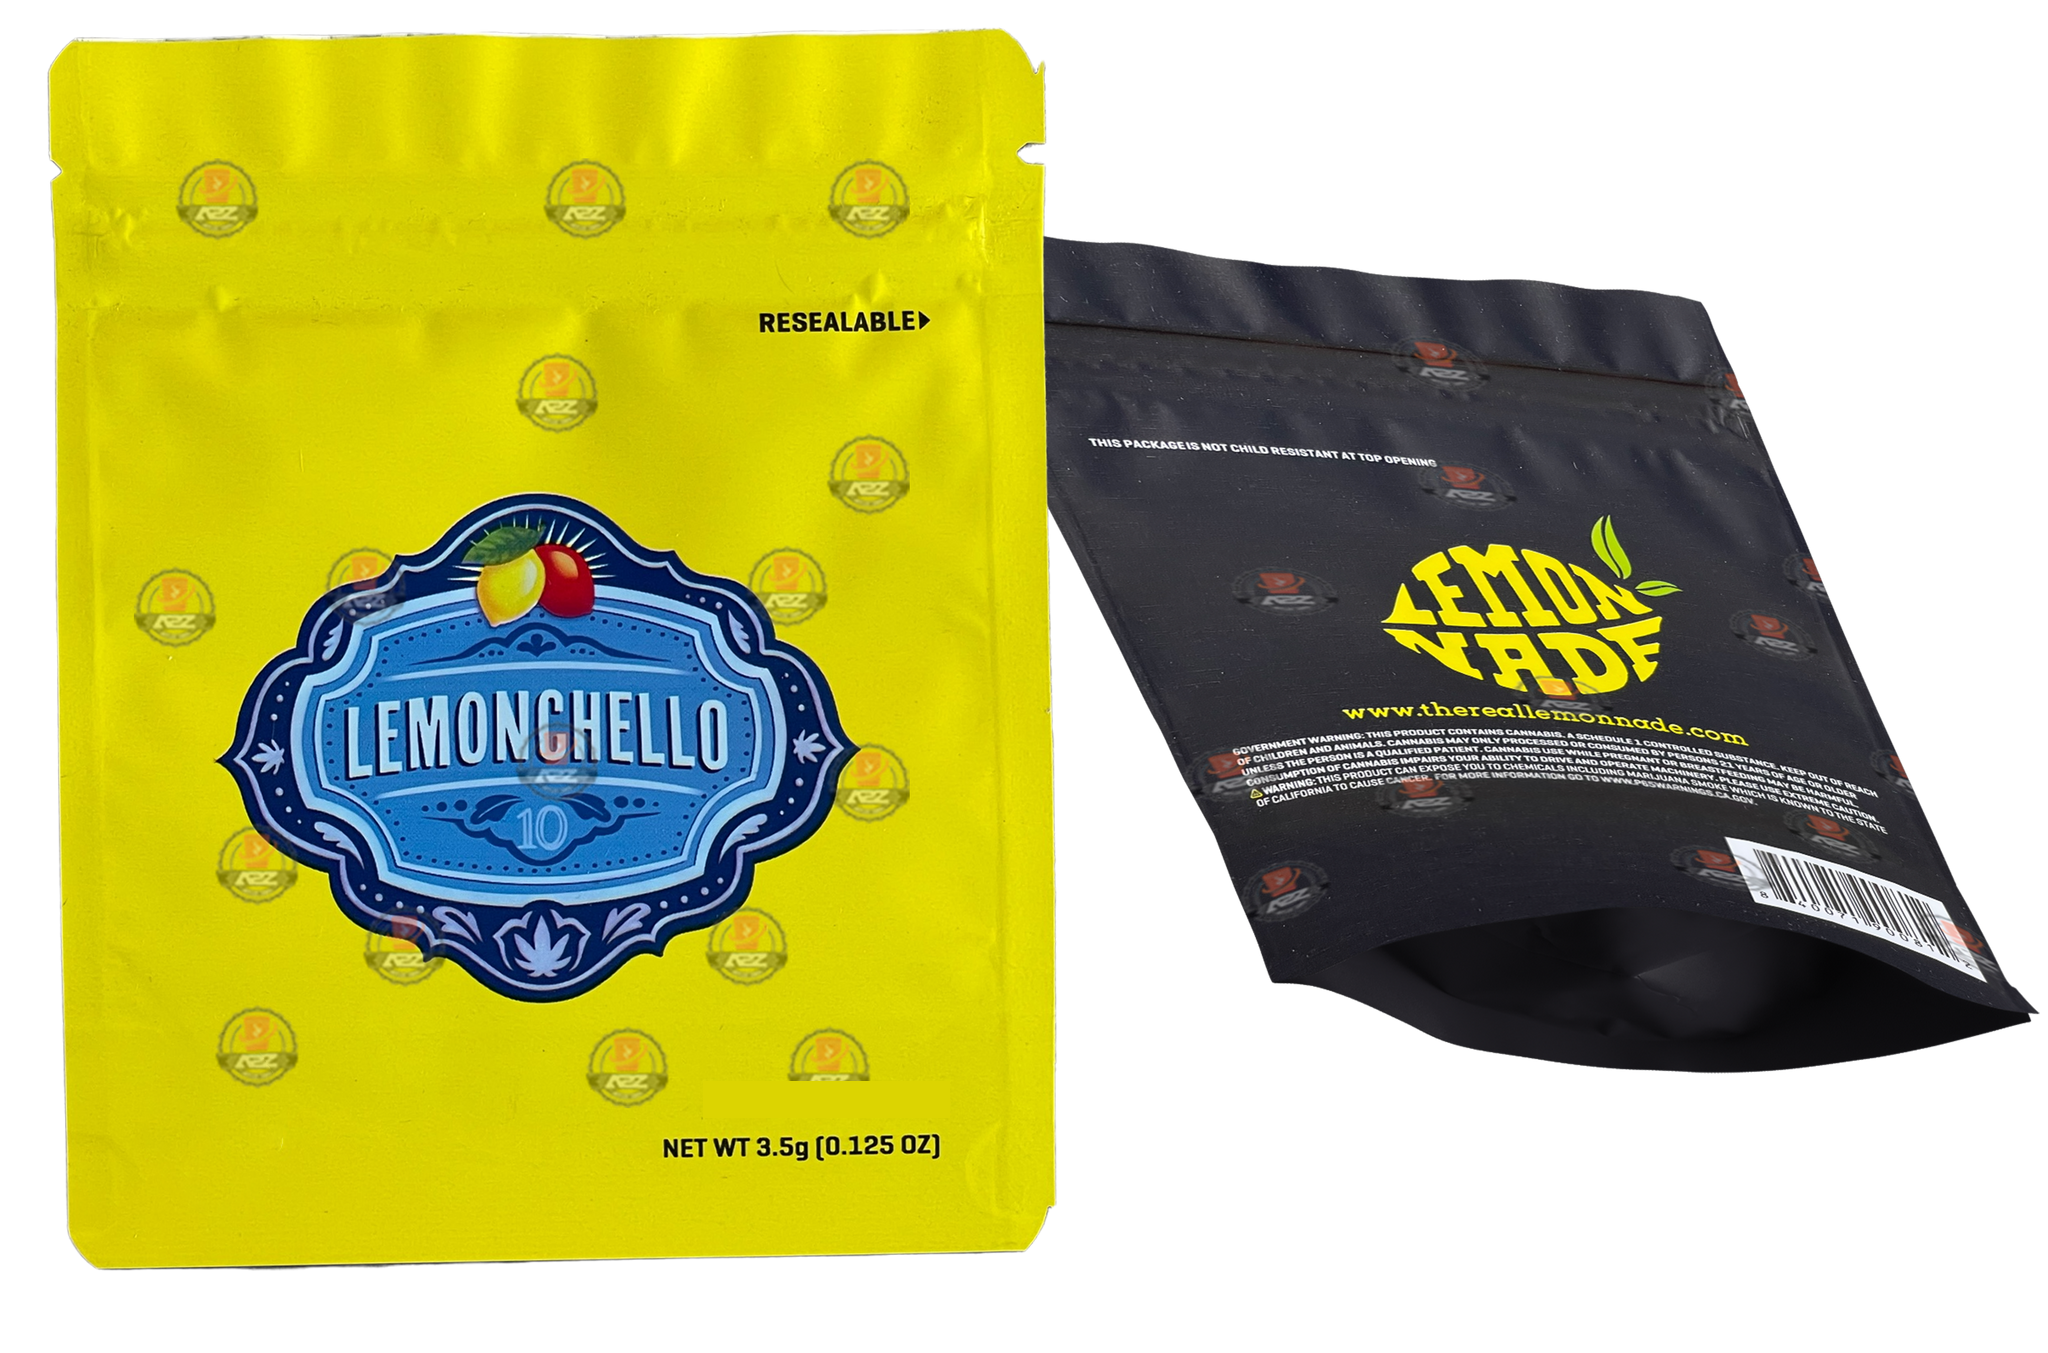 Cookies Lemonchello Mylar Bags 3.5 Grams Smell Proof Resealable Bags w/ Holographic Authenticity Stickers )